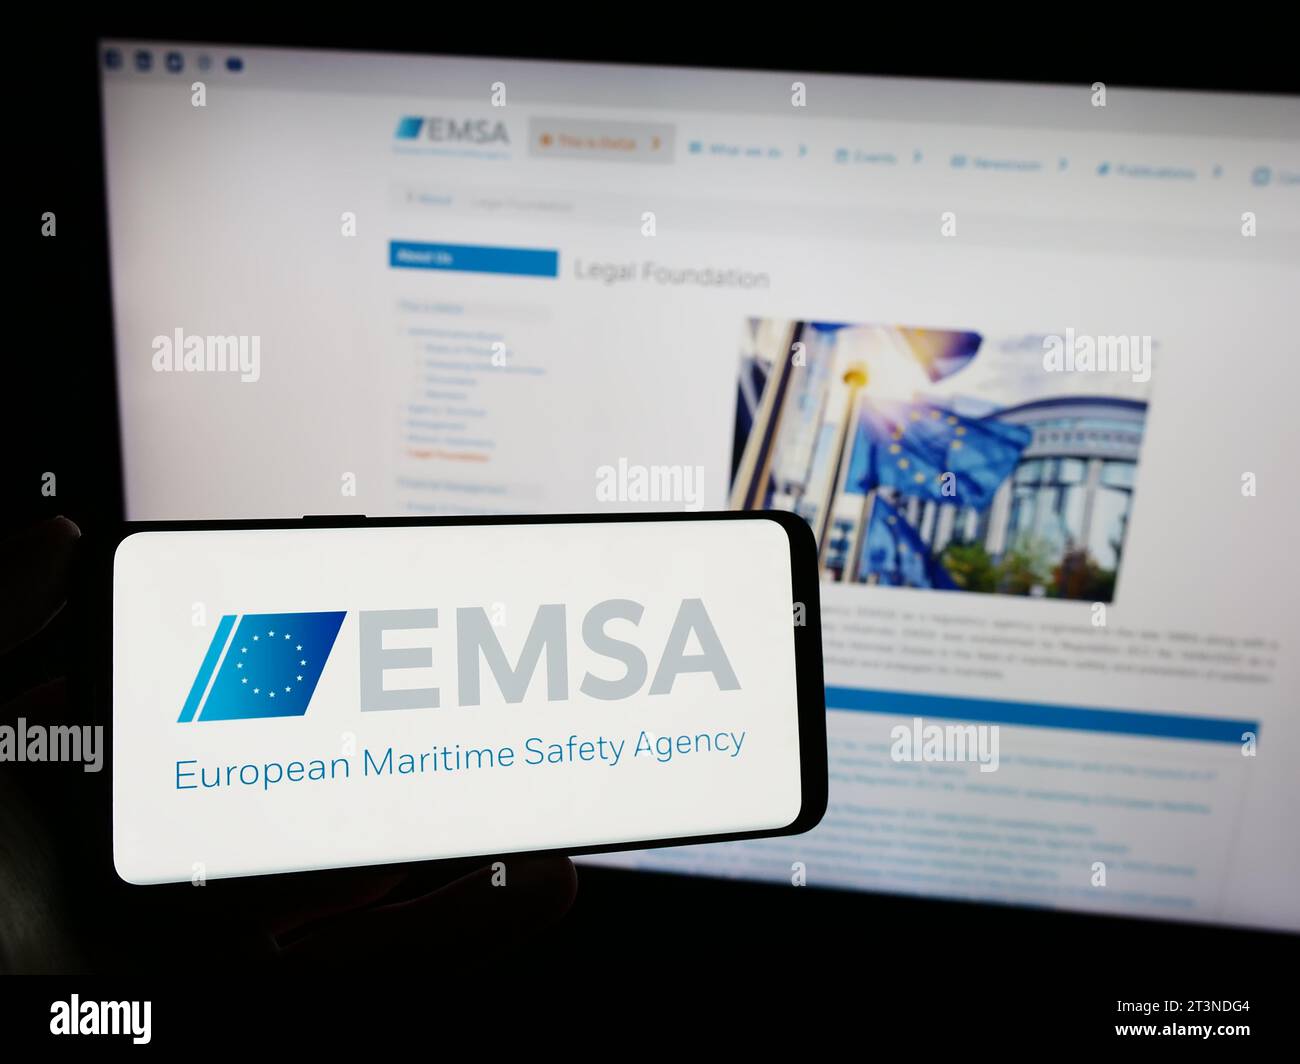 Person holding smartphone with logo of EU institution European Maritime Safety Agency (EMSA) in front of website. Focus on phone display. Stock Photo